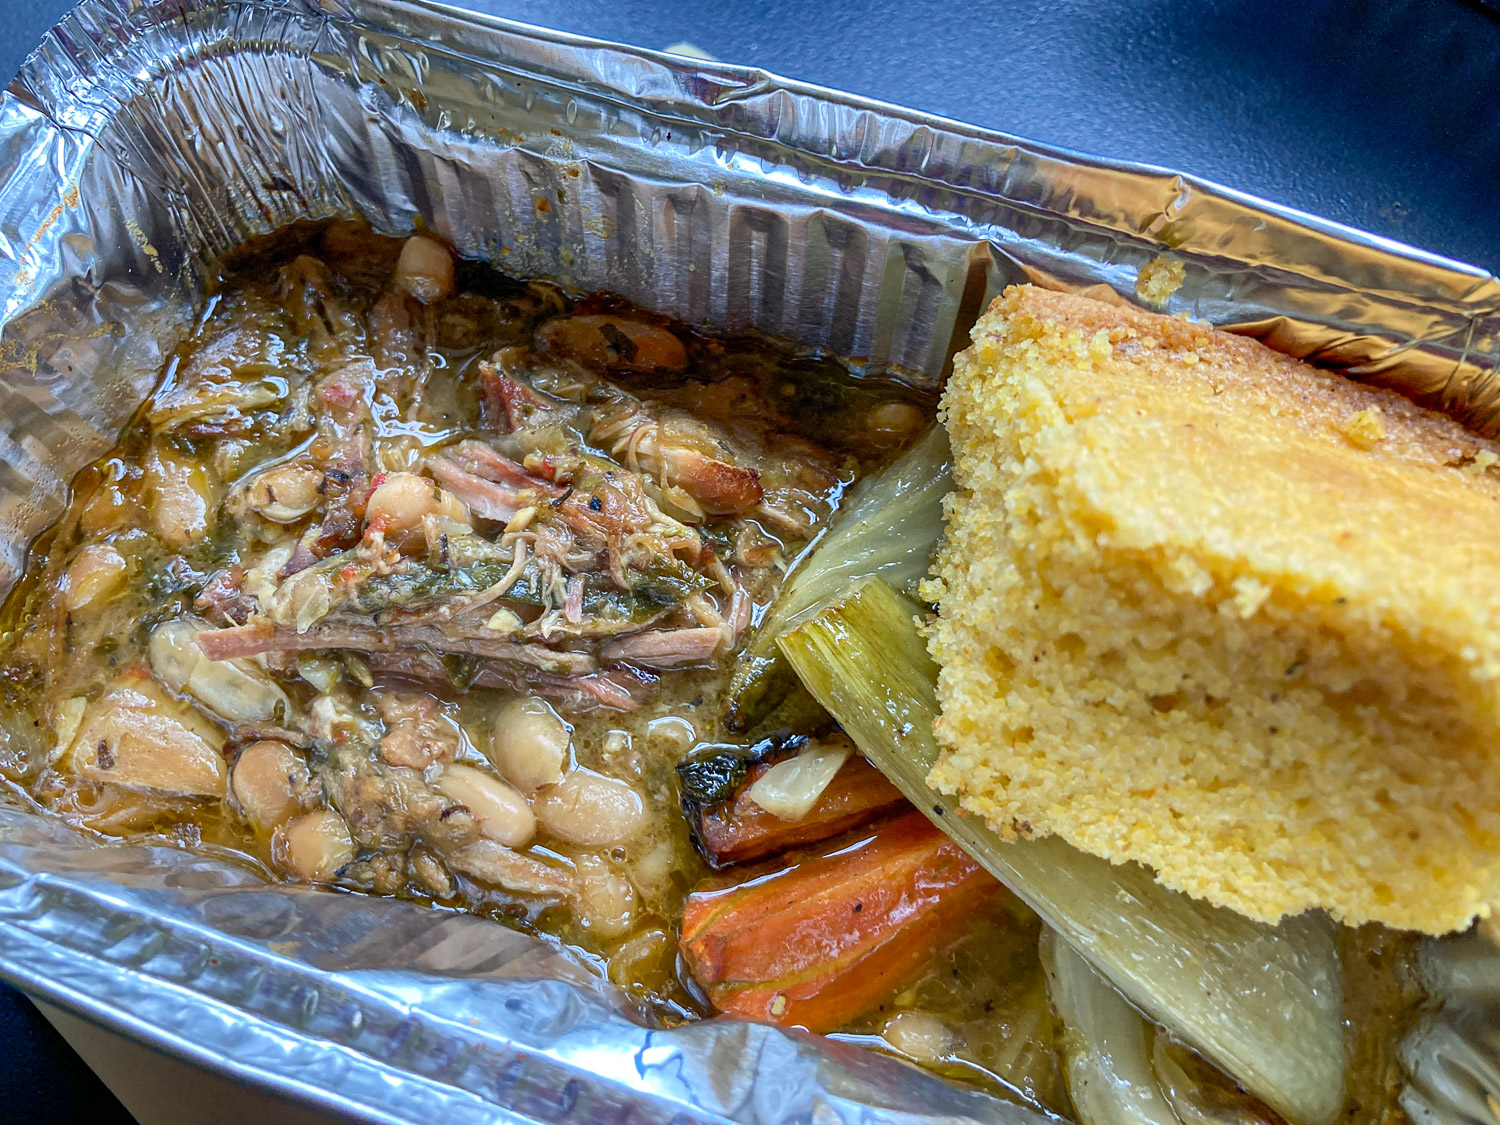 A foil dish with a stew of meat, white beans and vegetables topped with cornbread